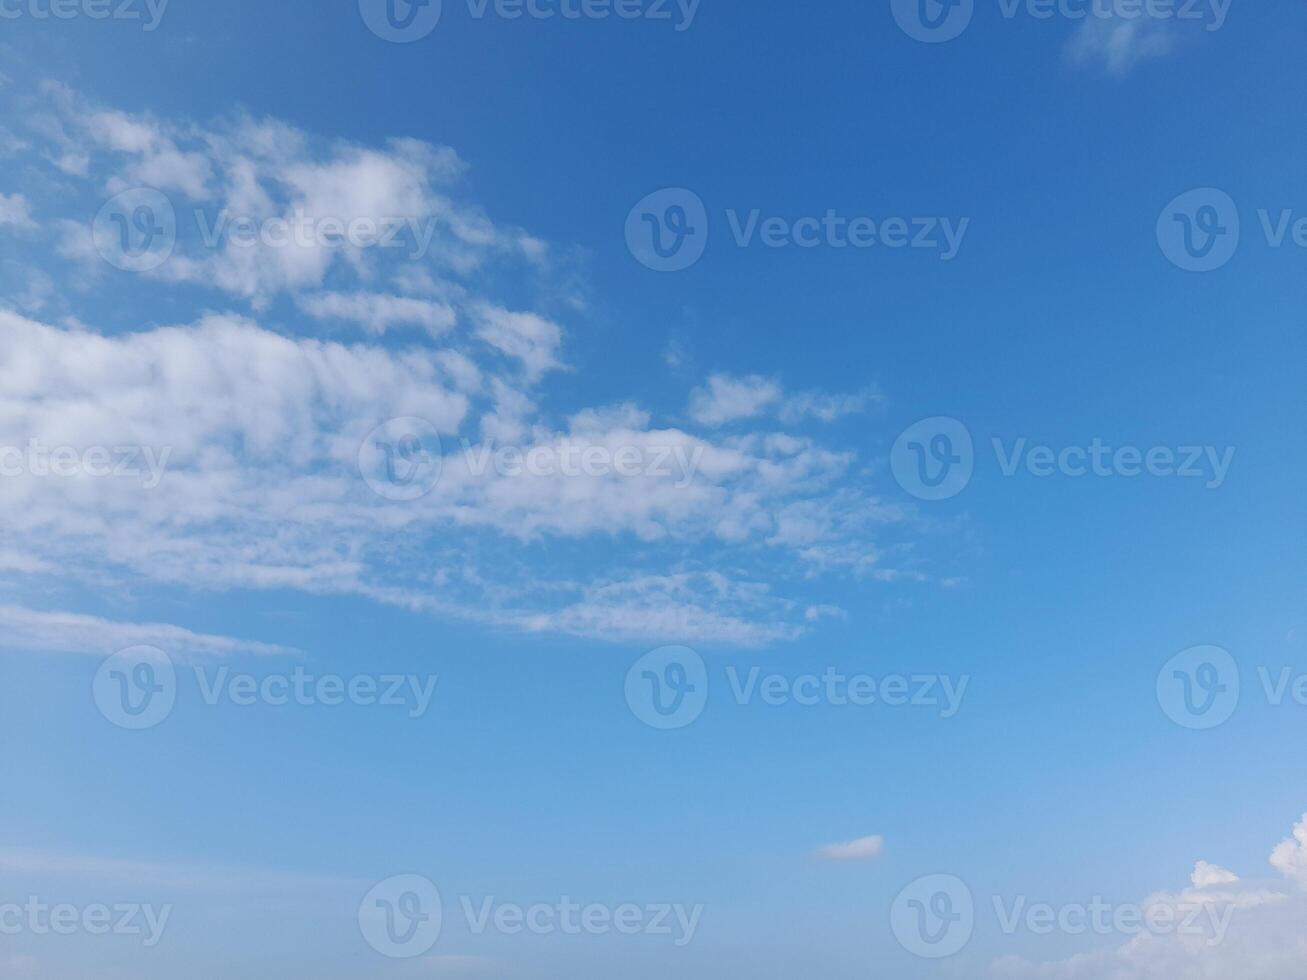 The white clouds on the blue sky are perfect for the background. Skyscape on Lombok Island, Indonesia photo